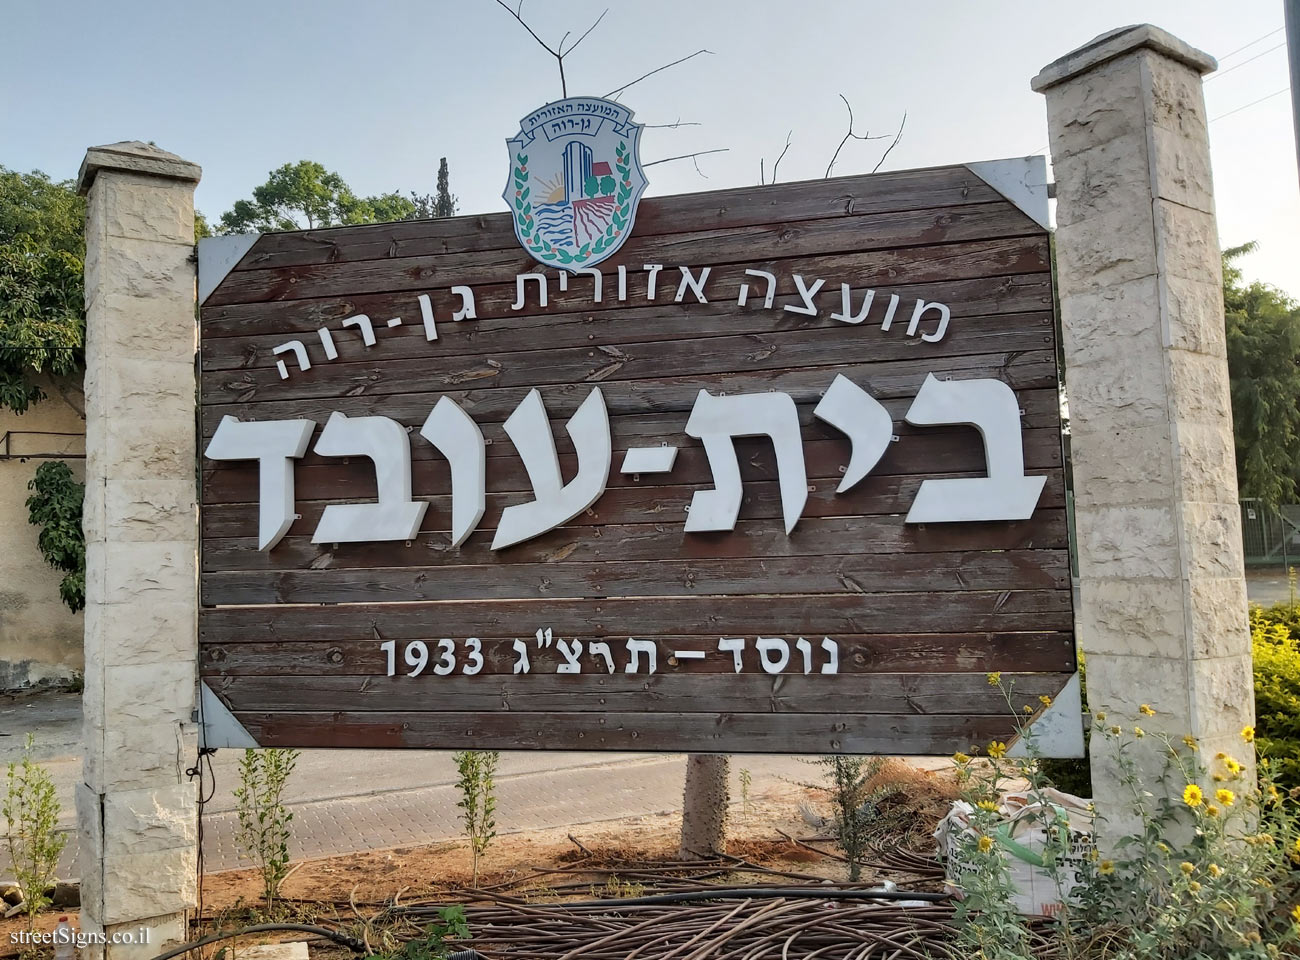 Beit Oved - entrance sign to the moshav